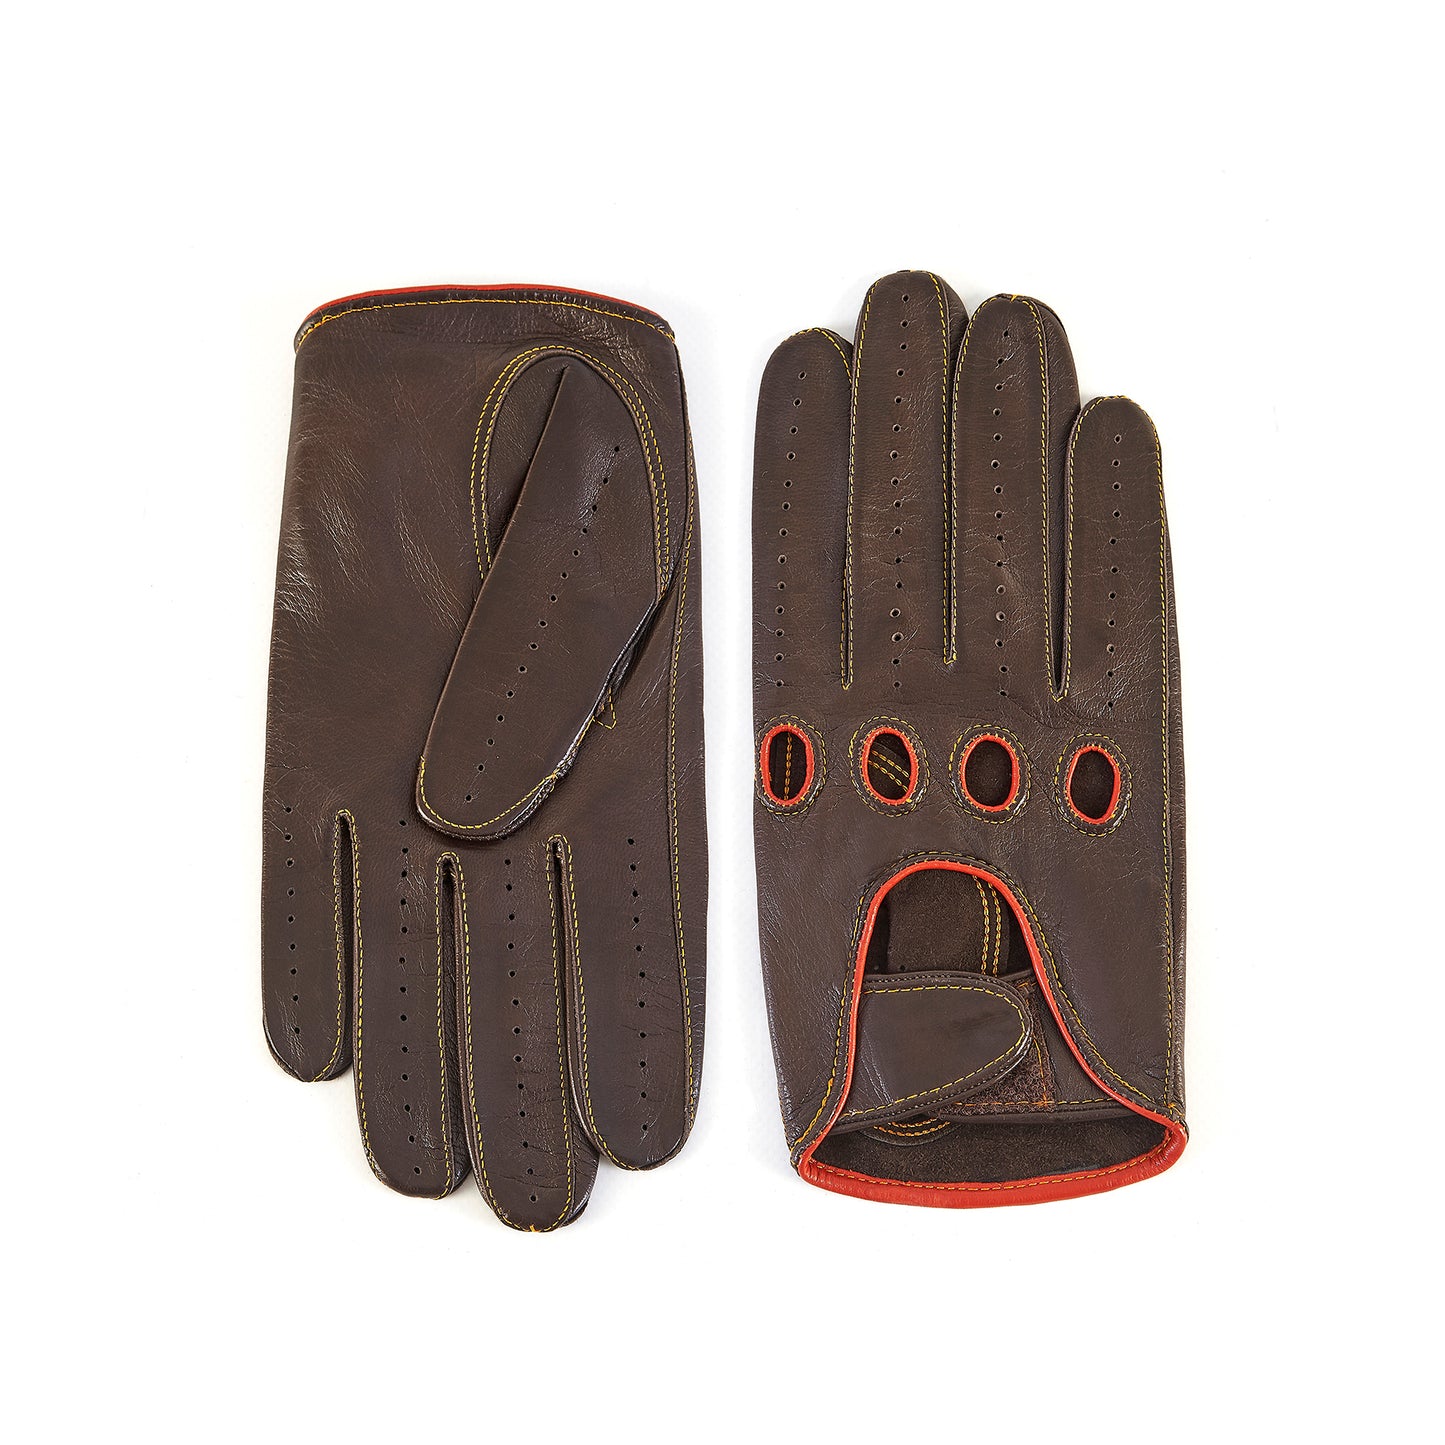 Men's brown leather driving gloves with strap closure